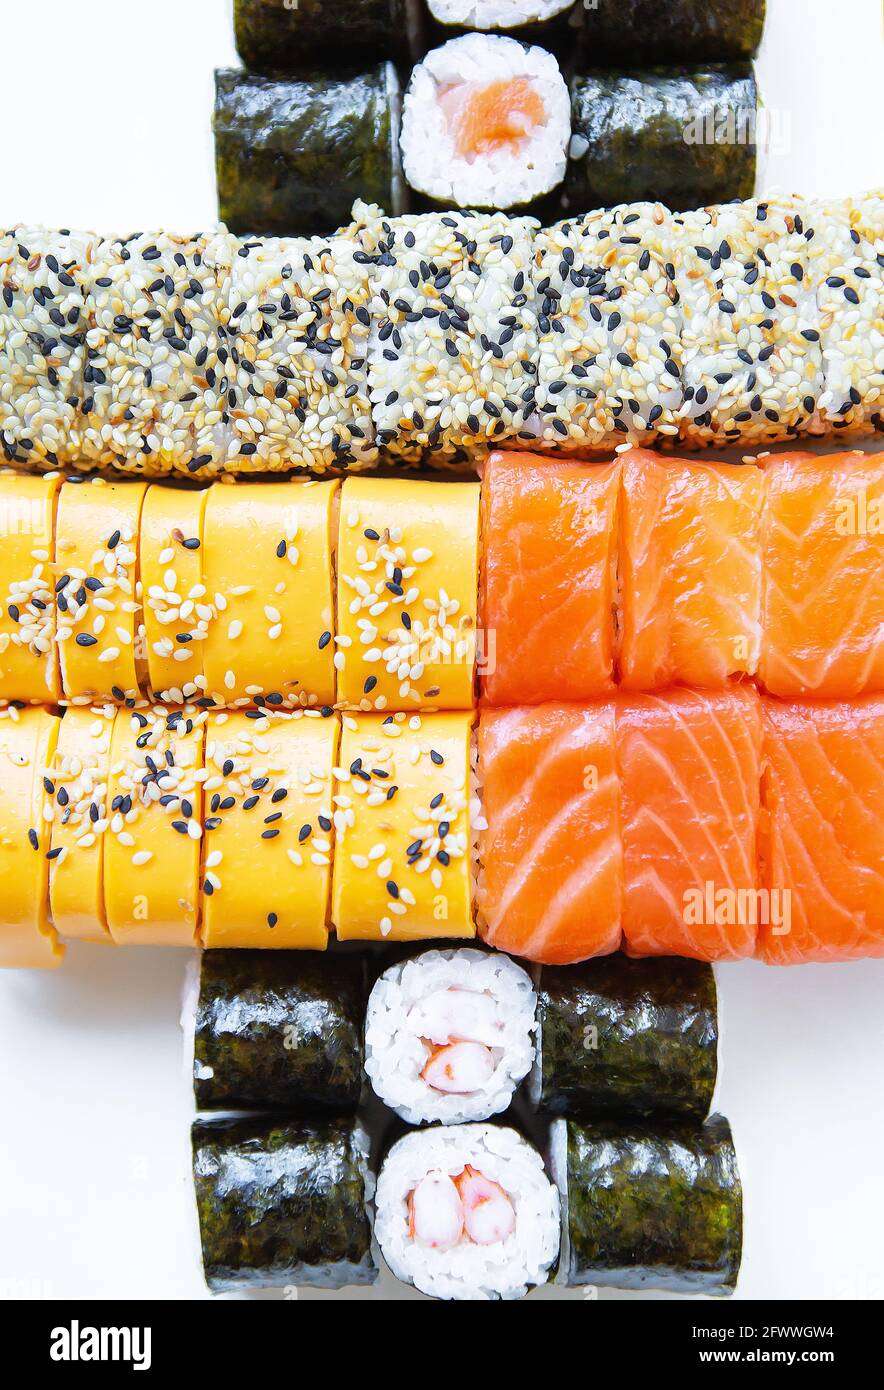 Sushi from Japanese cuisine. There are different types of sushi in the box.  Delicious and healthy food delivery concept. View from above Stock Photo -  Alamy